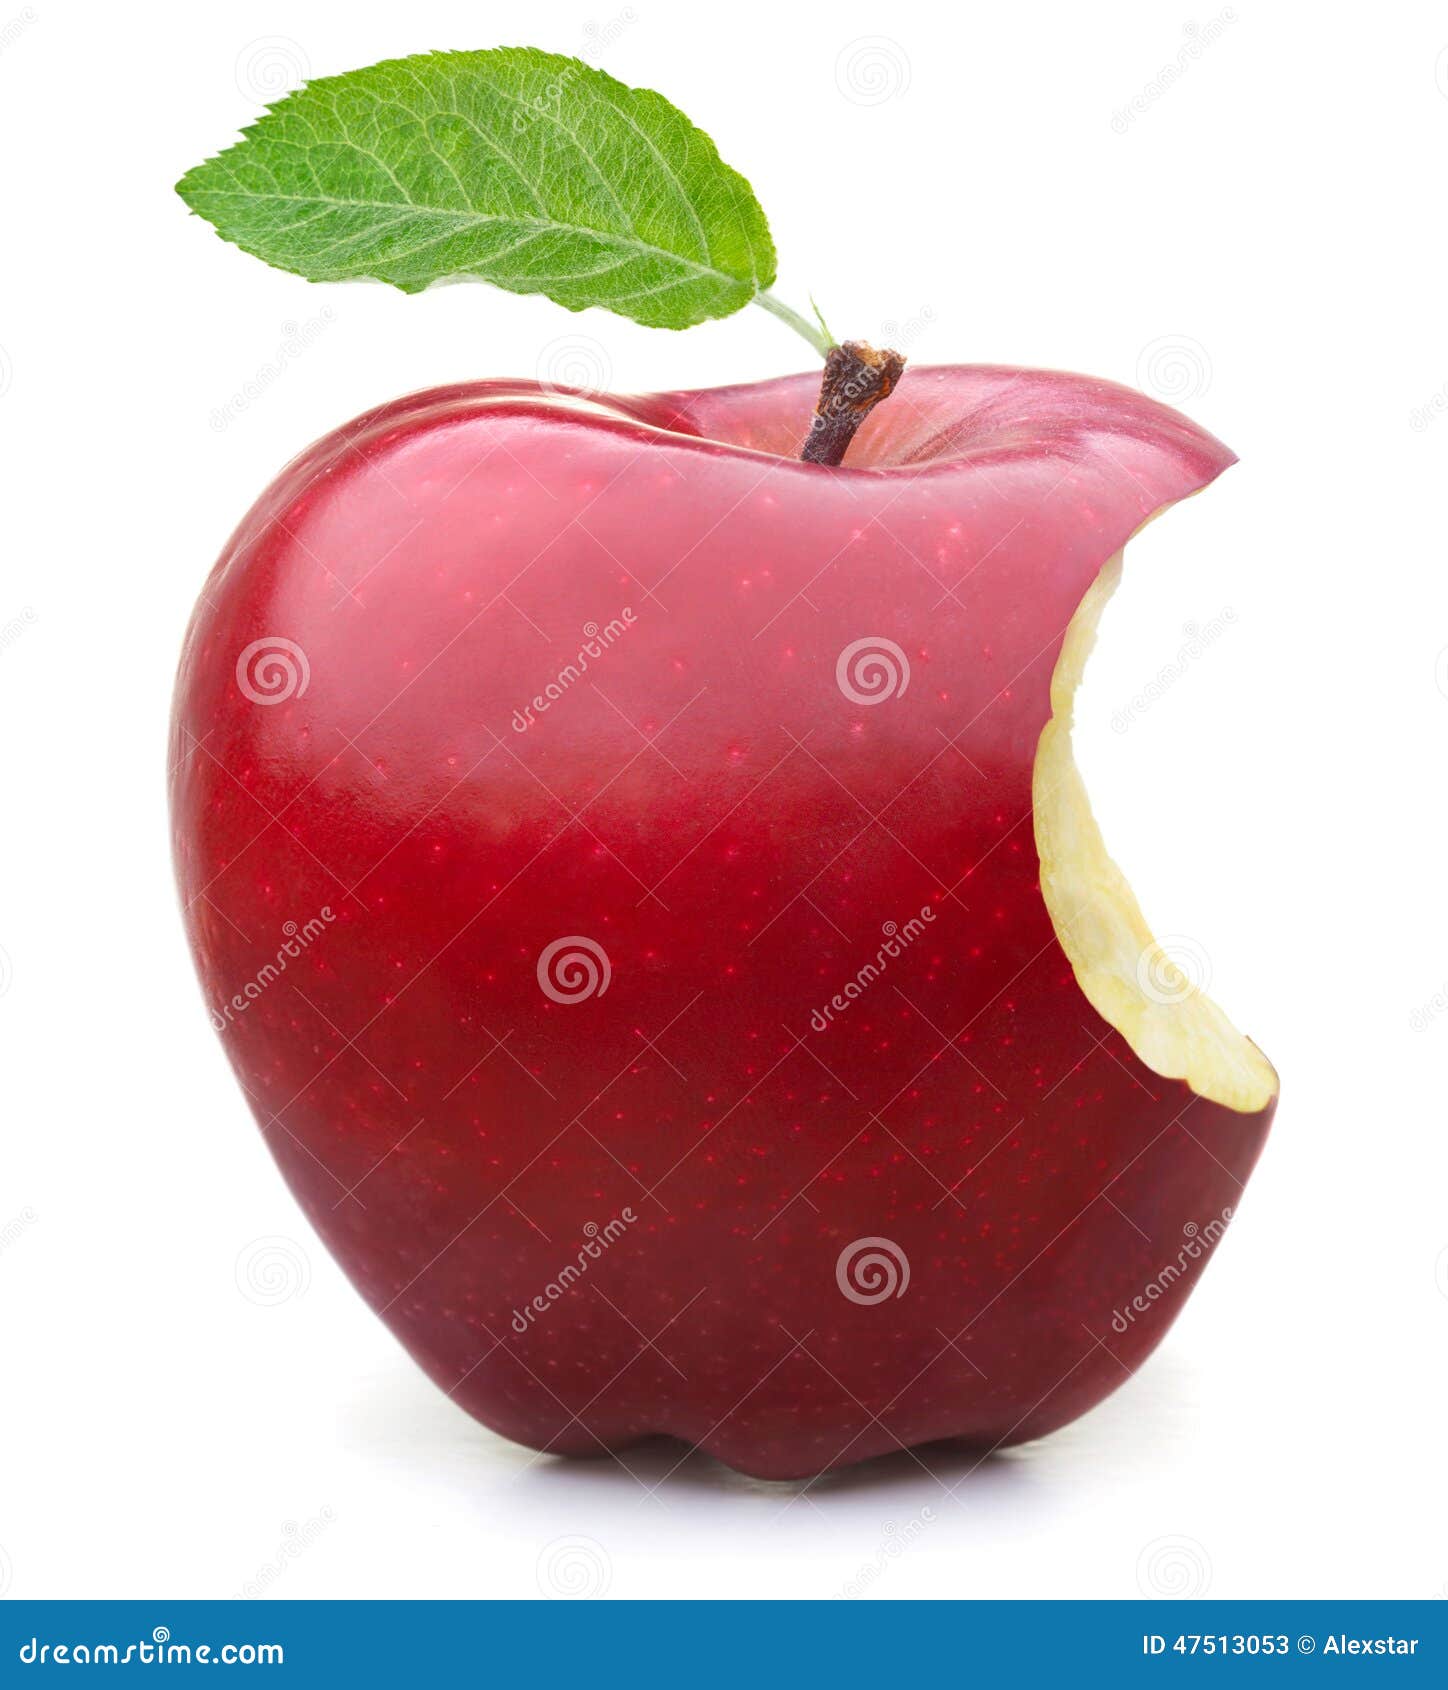 red apple missing a bite